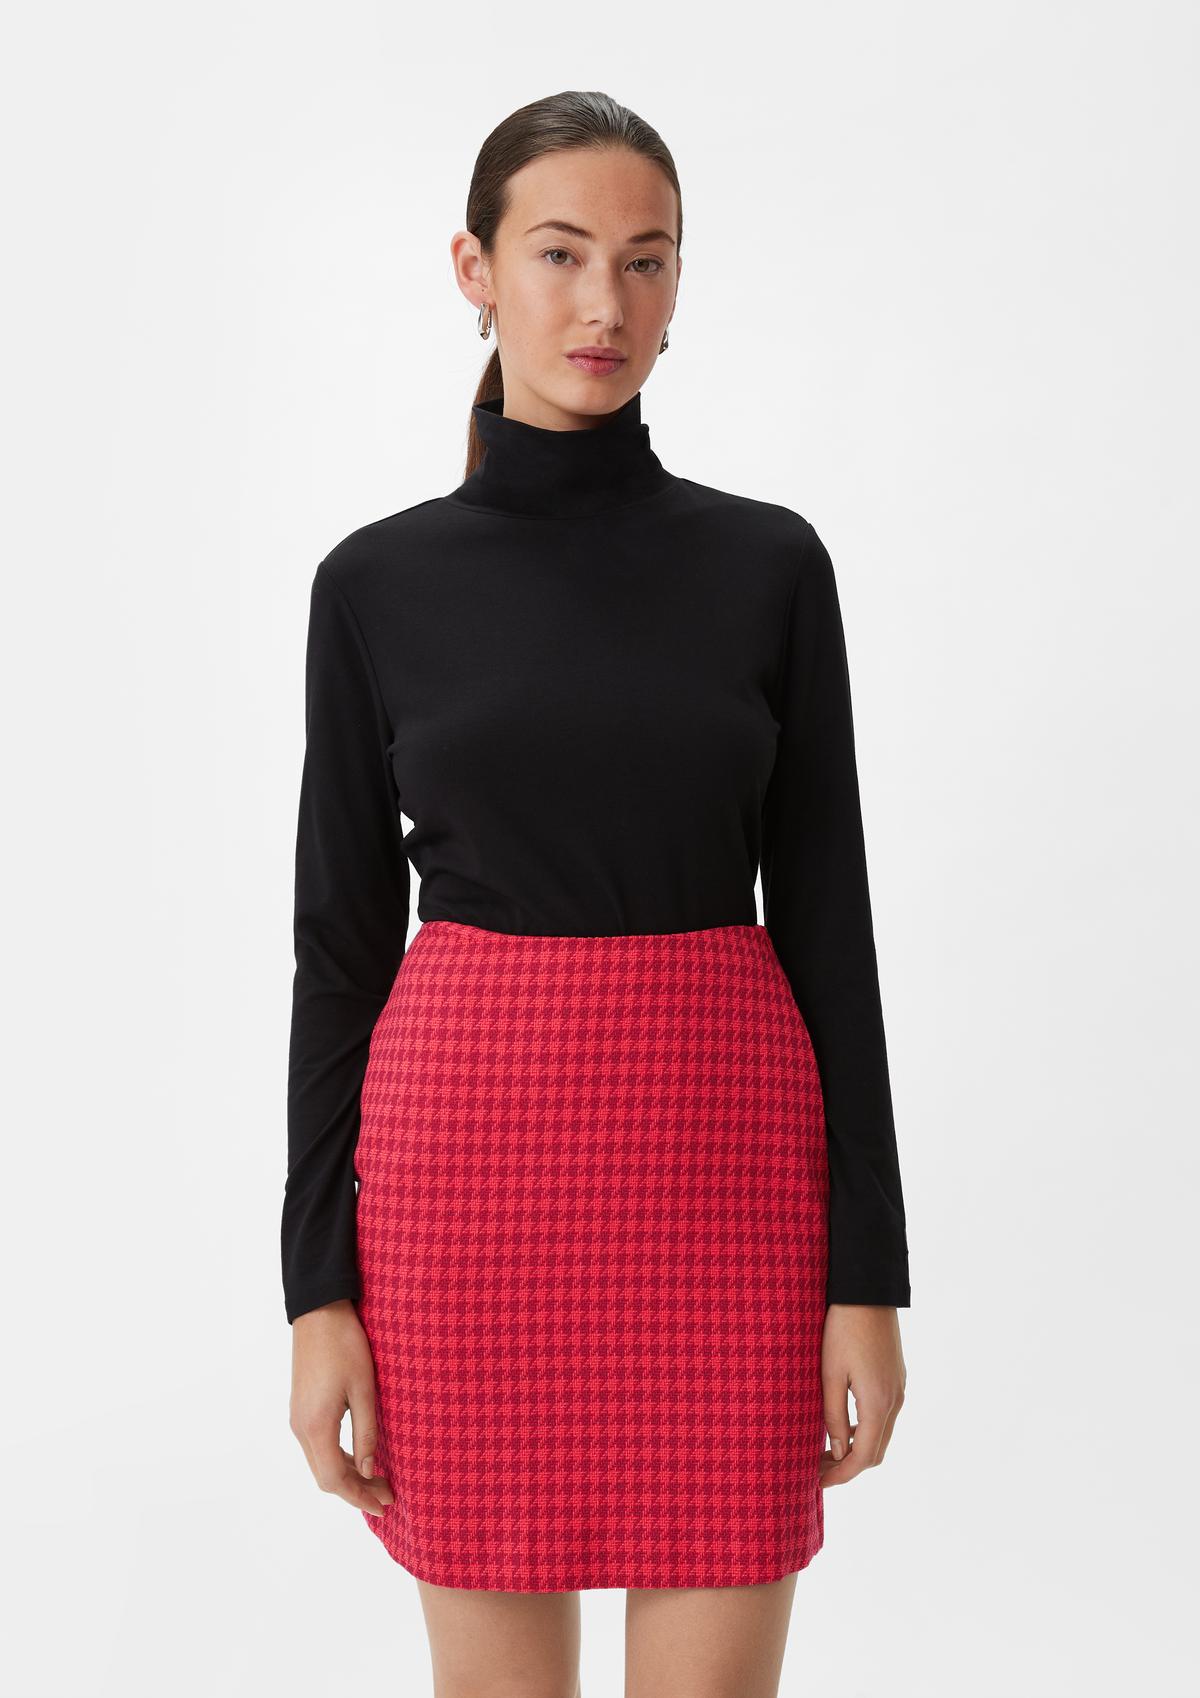 Dobby skirt with a houndstooth pattern